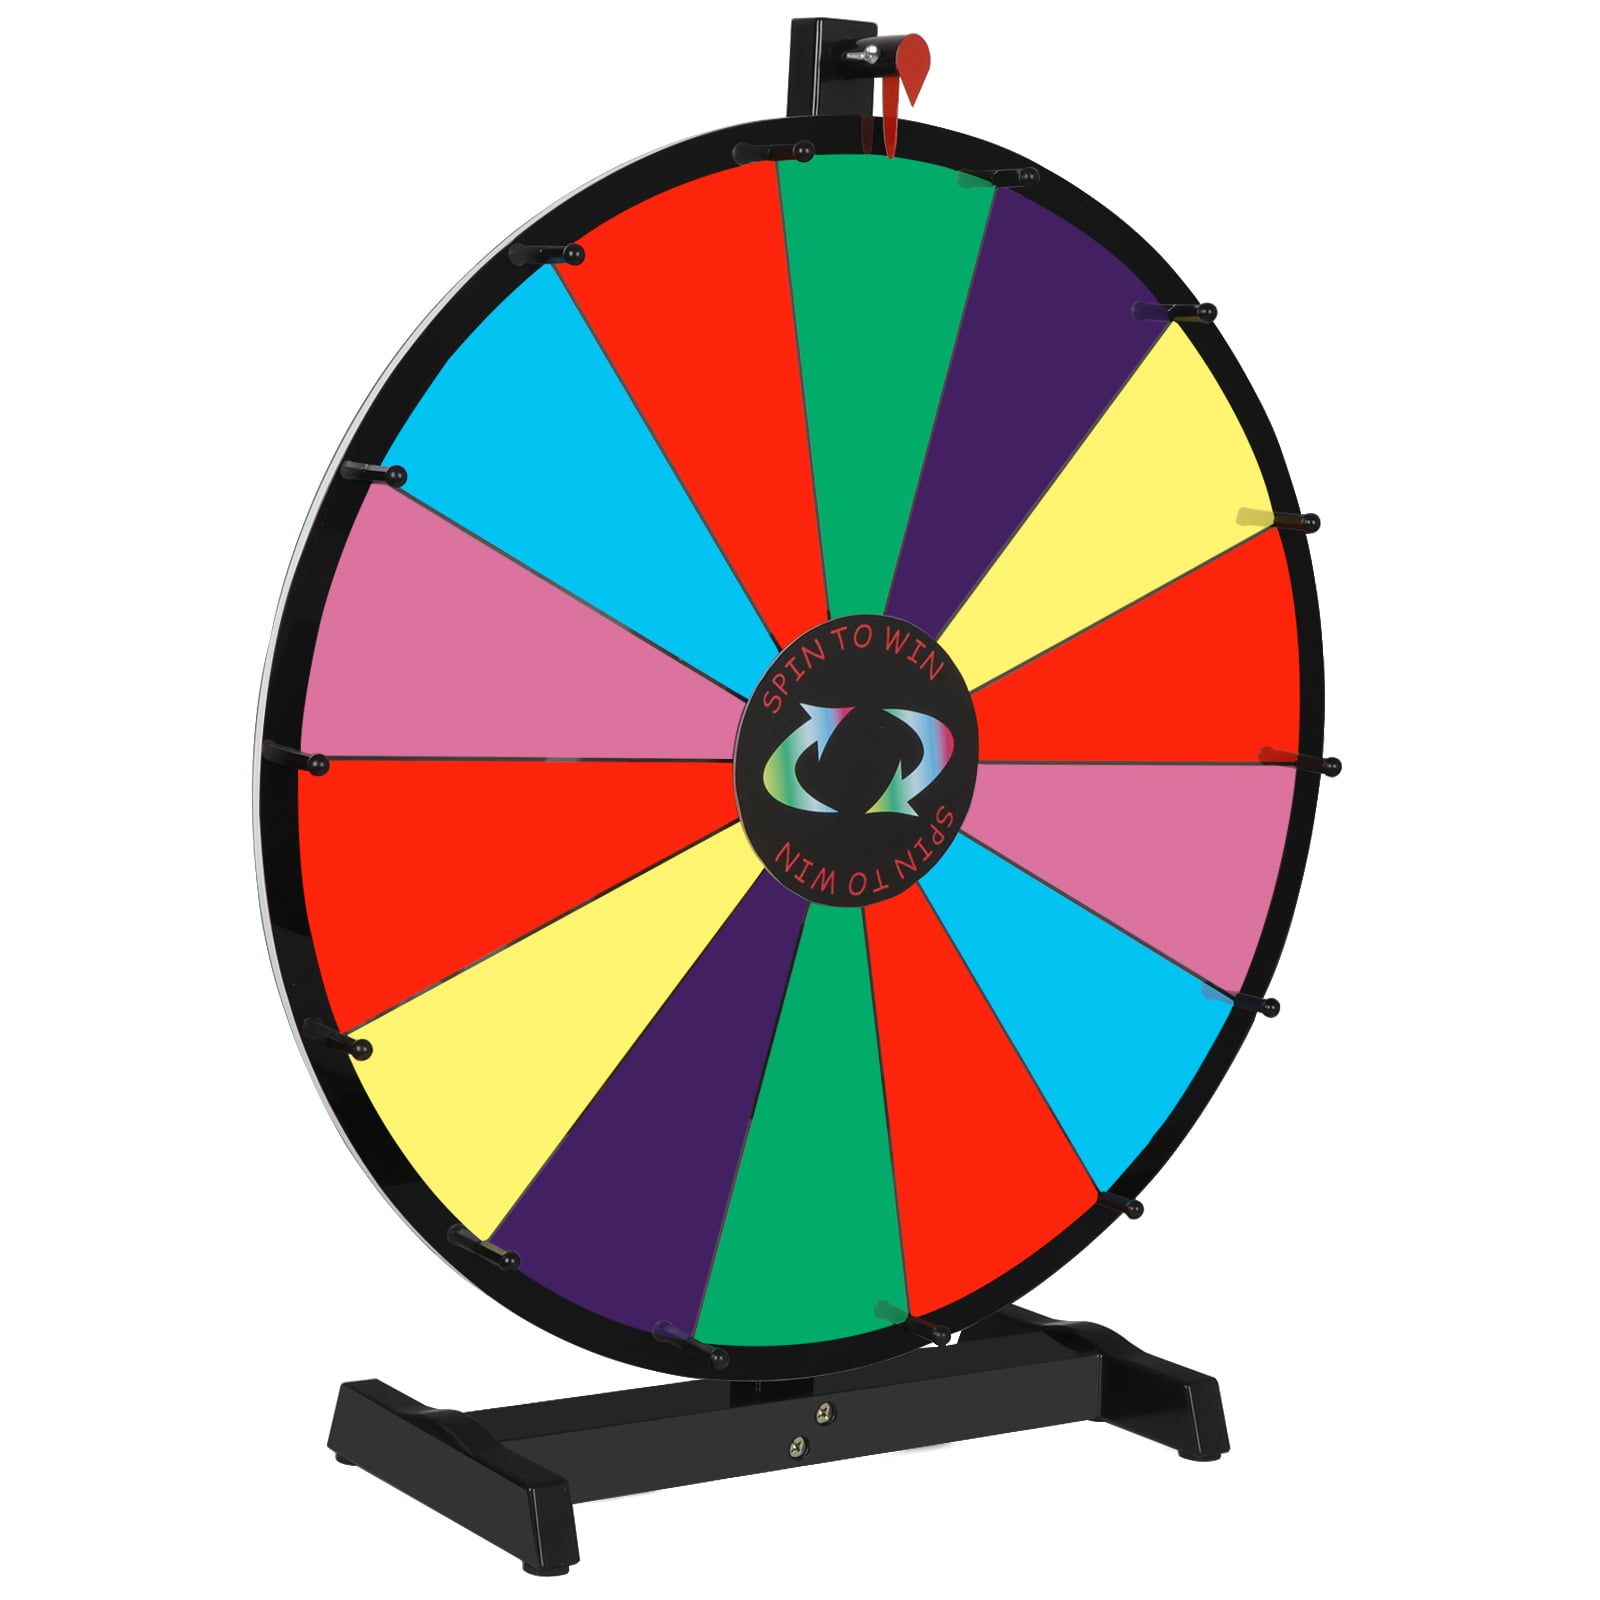 24" Tabletop Dry Erase Prize Wheel of Fortune Spinning Casino Event Party Game 